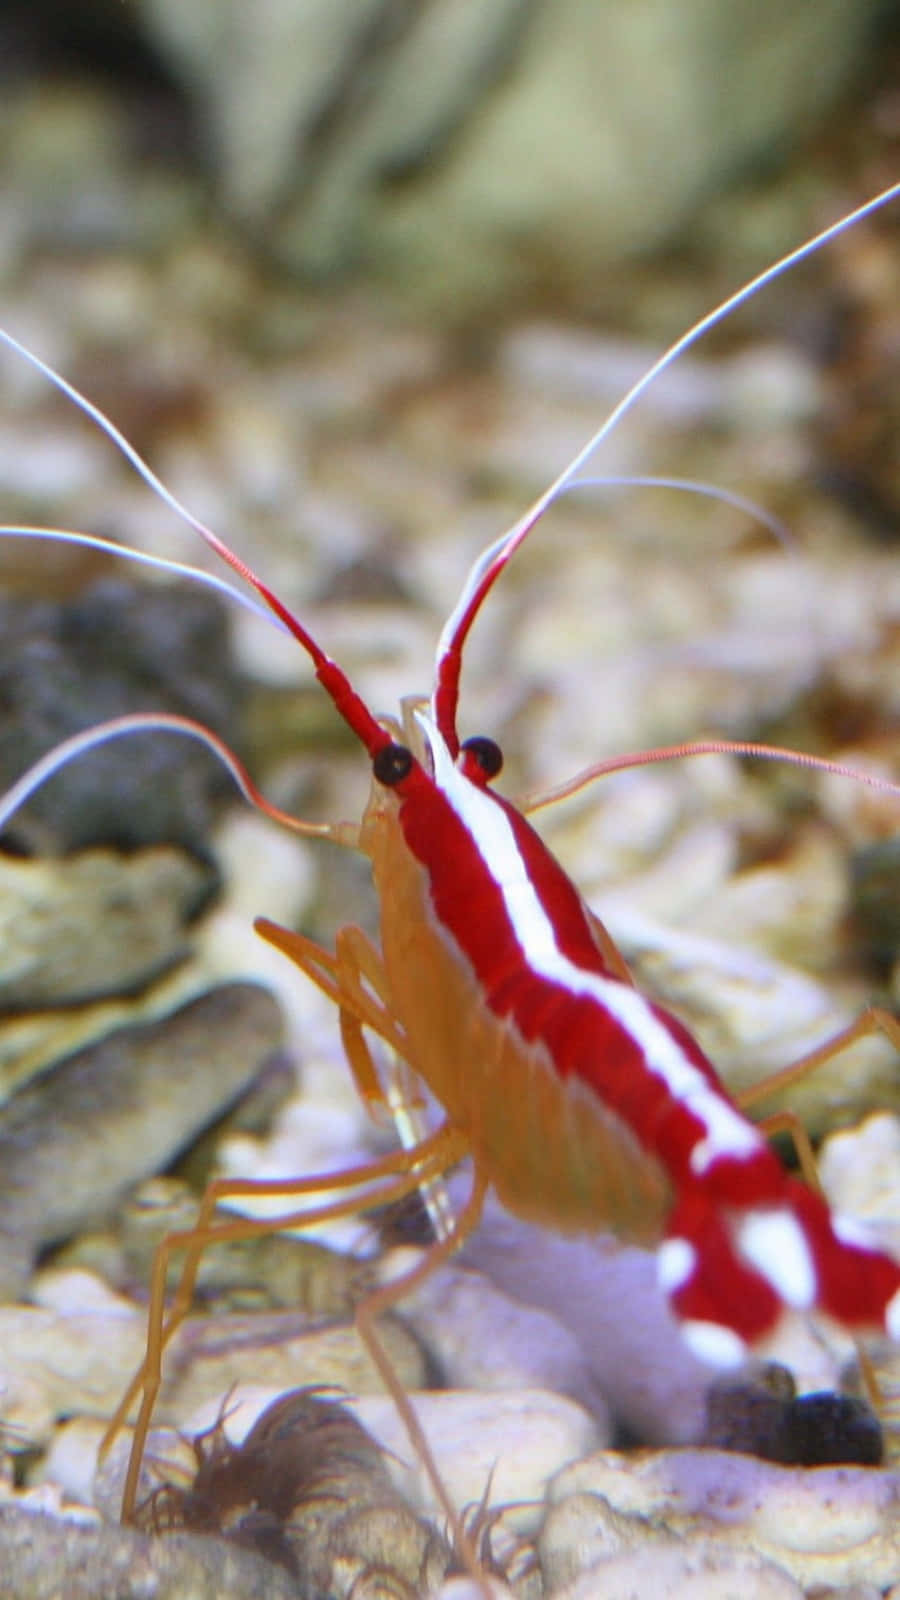 Exquisite Display Of Underwater Beauty: A Close-up Shot Of A Vibrant Shrimp In Its Natural Habitat Wallpaper